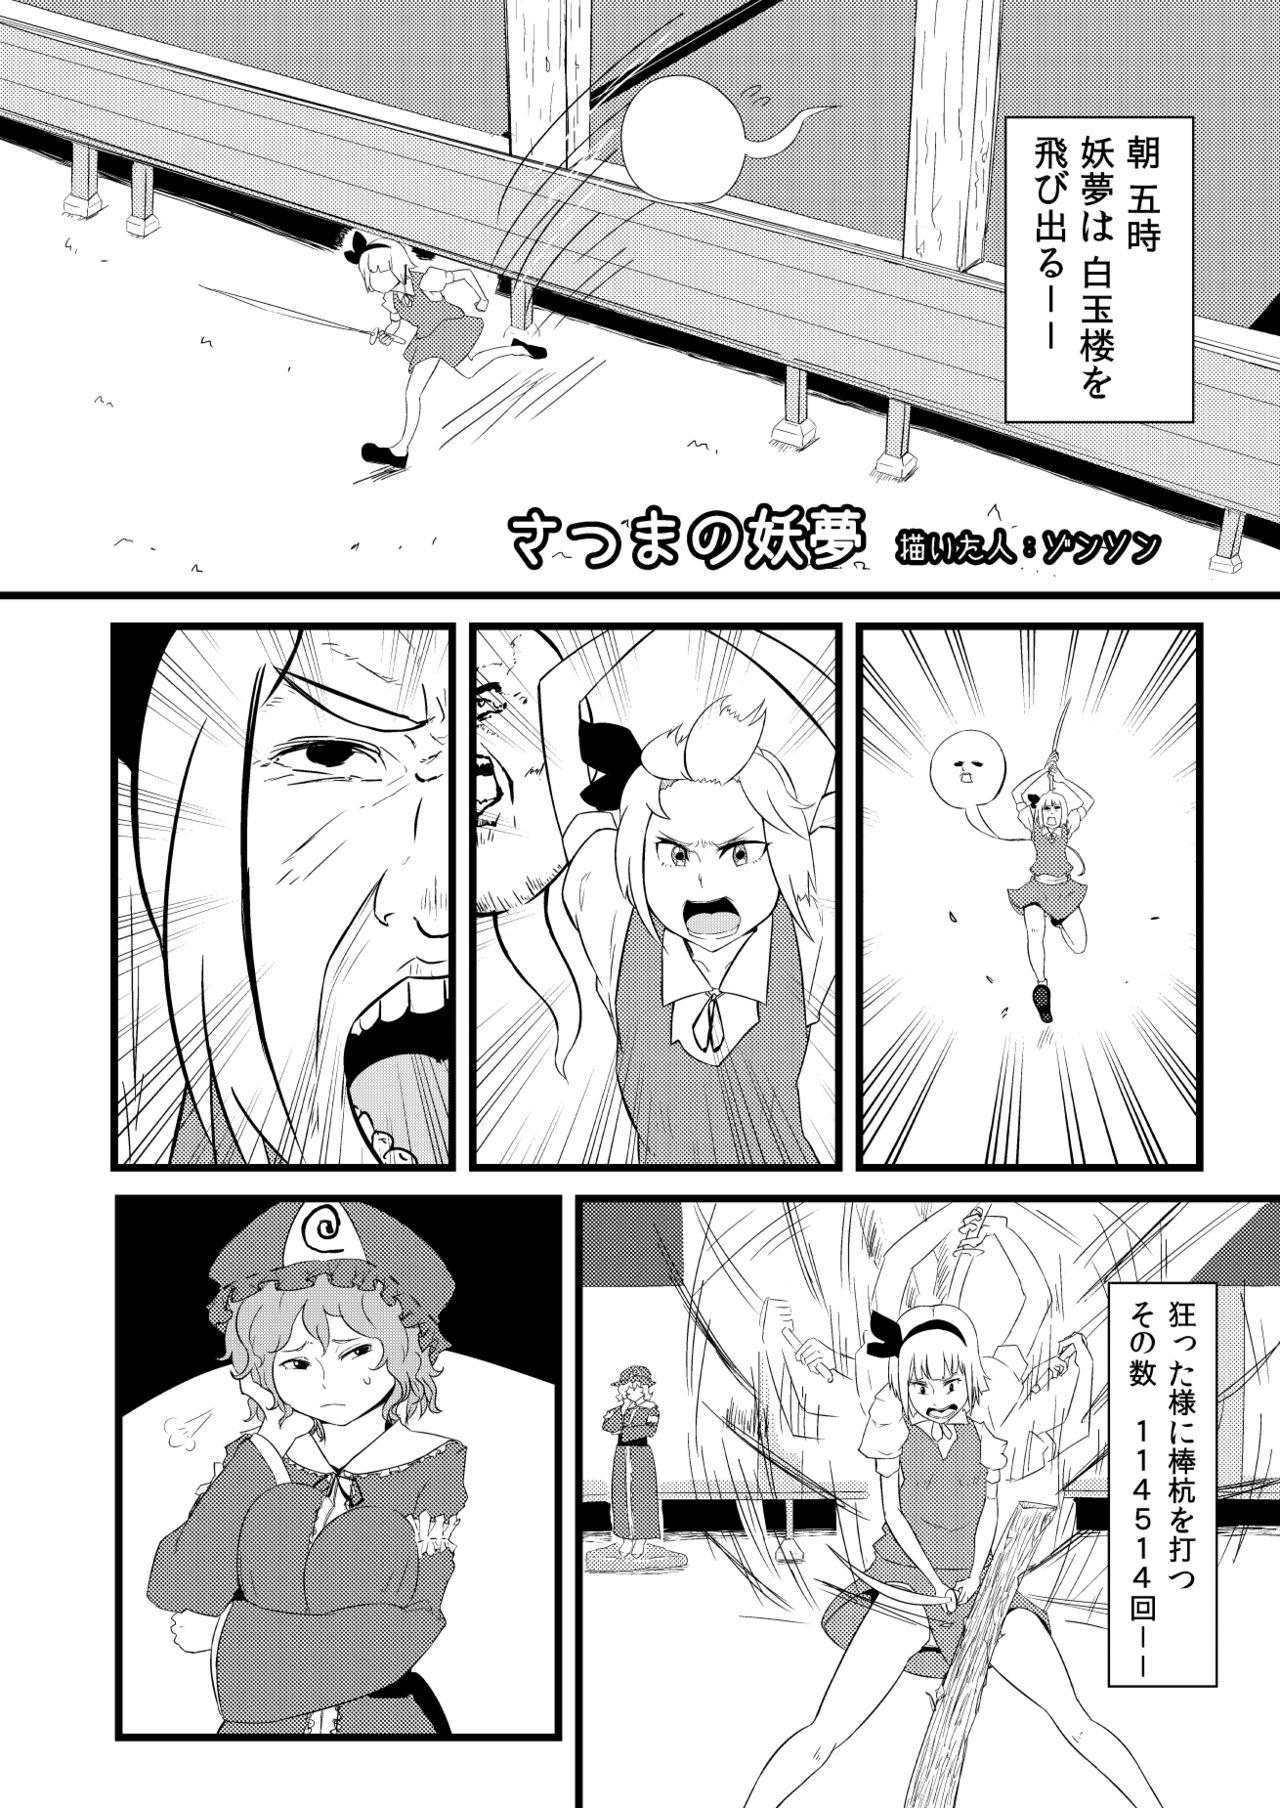 Gays 東方板としあき合同誌5 - Touhou project Short Hair - Page 1